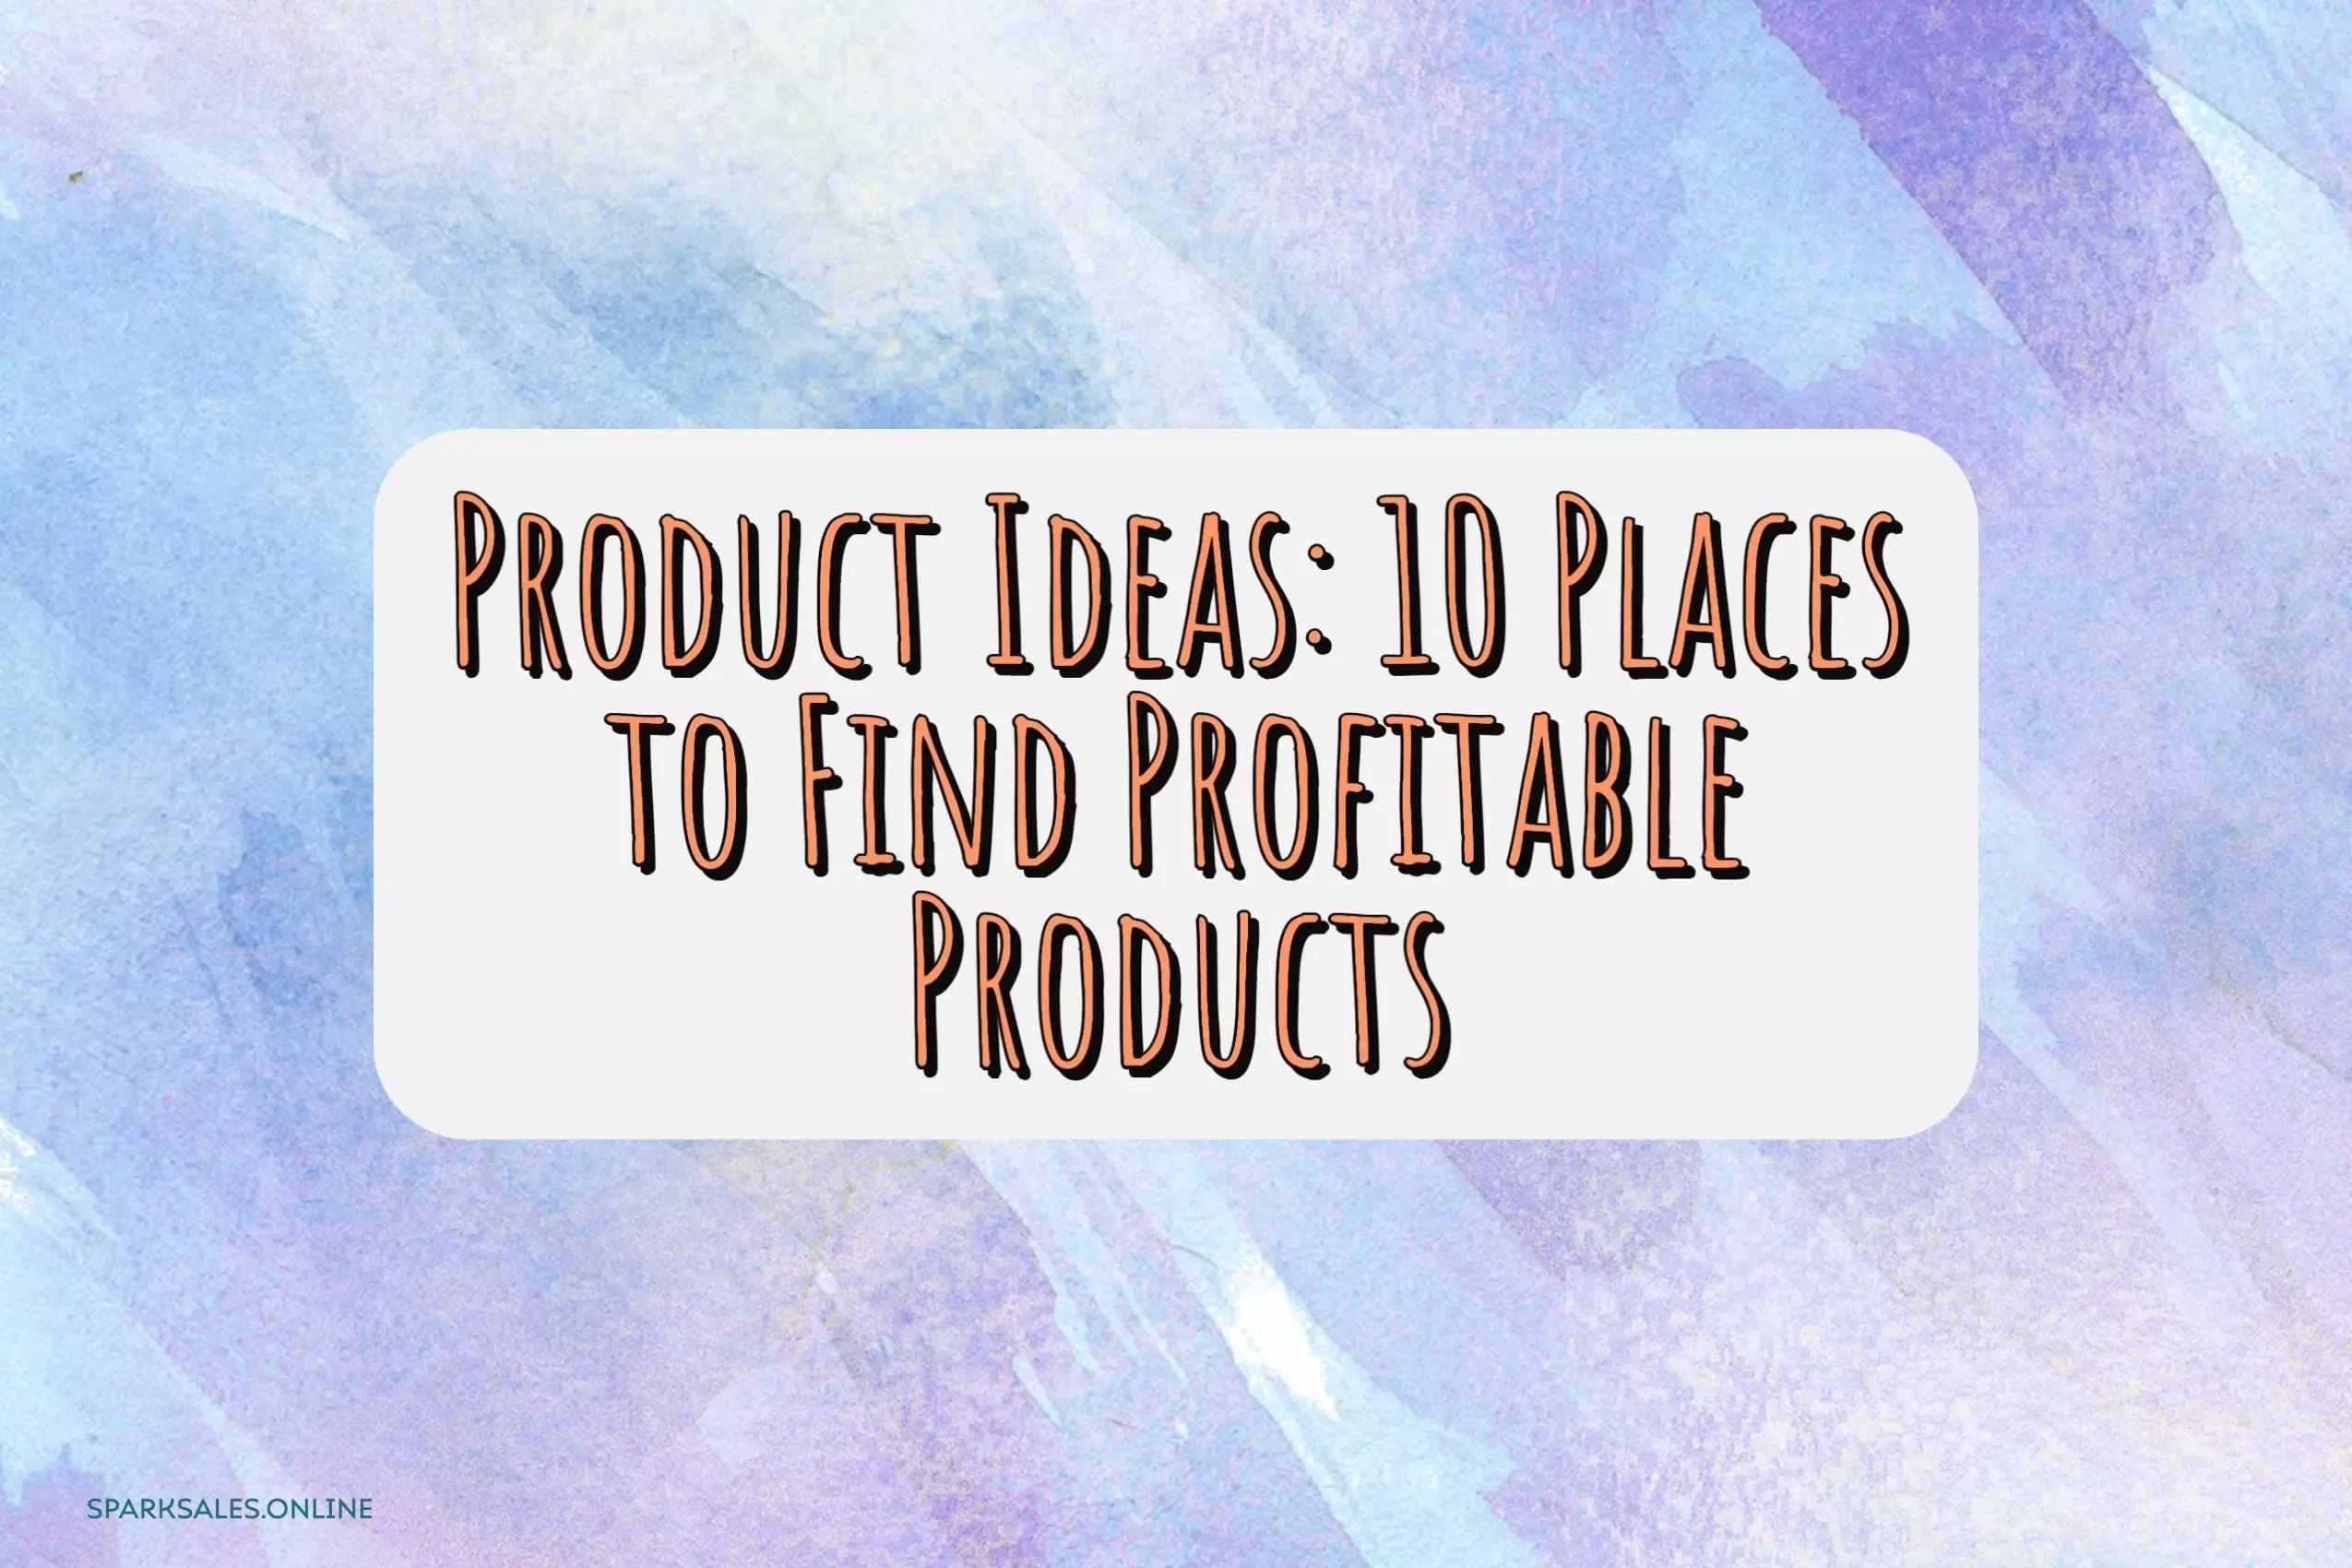 Product Ideas: 10 Places to Find Profitable Products